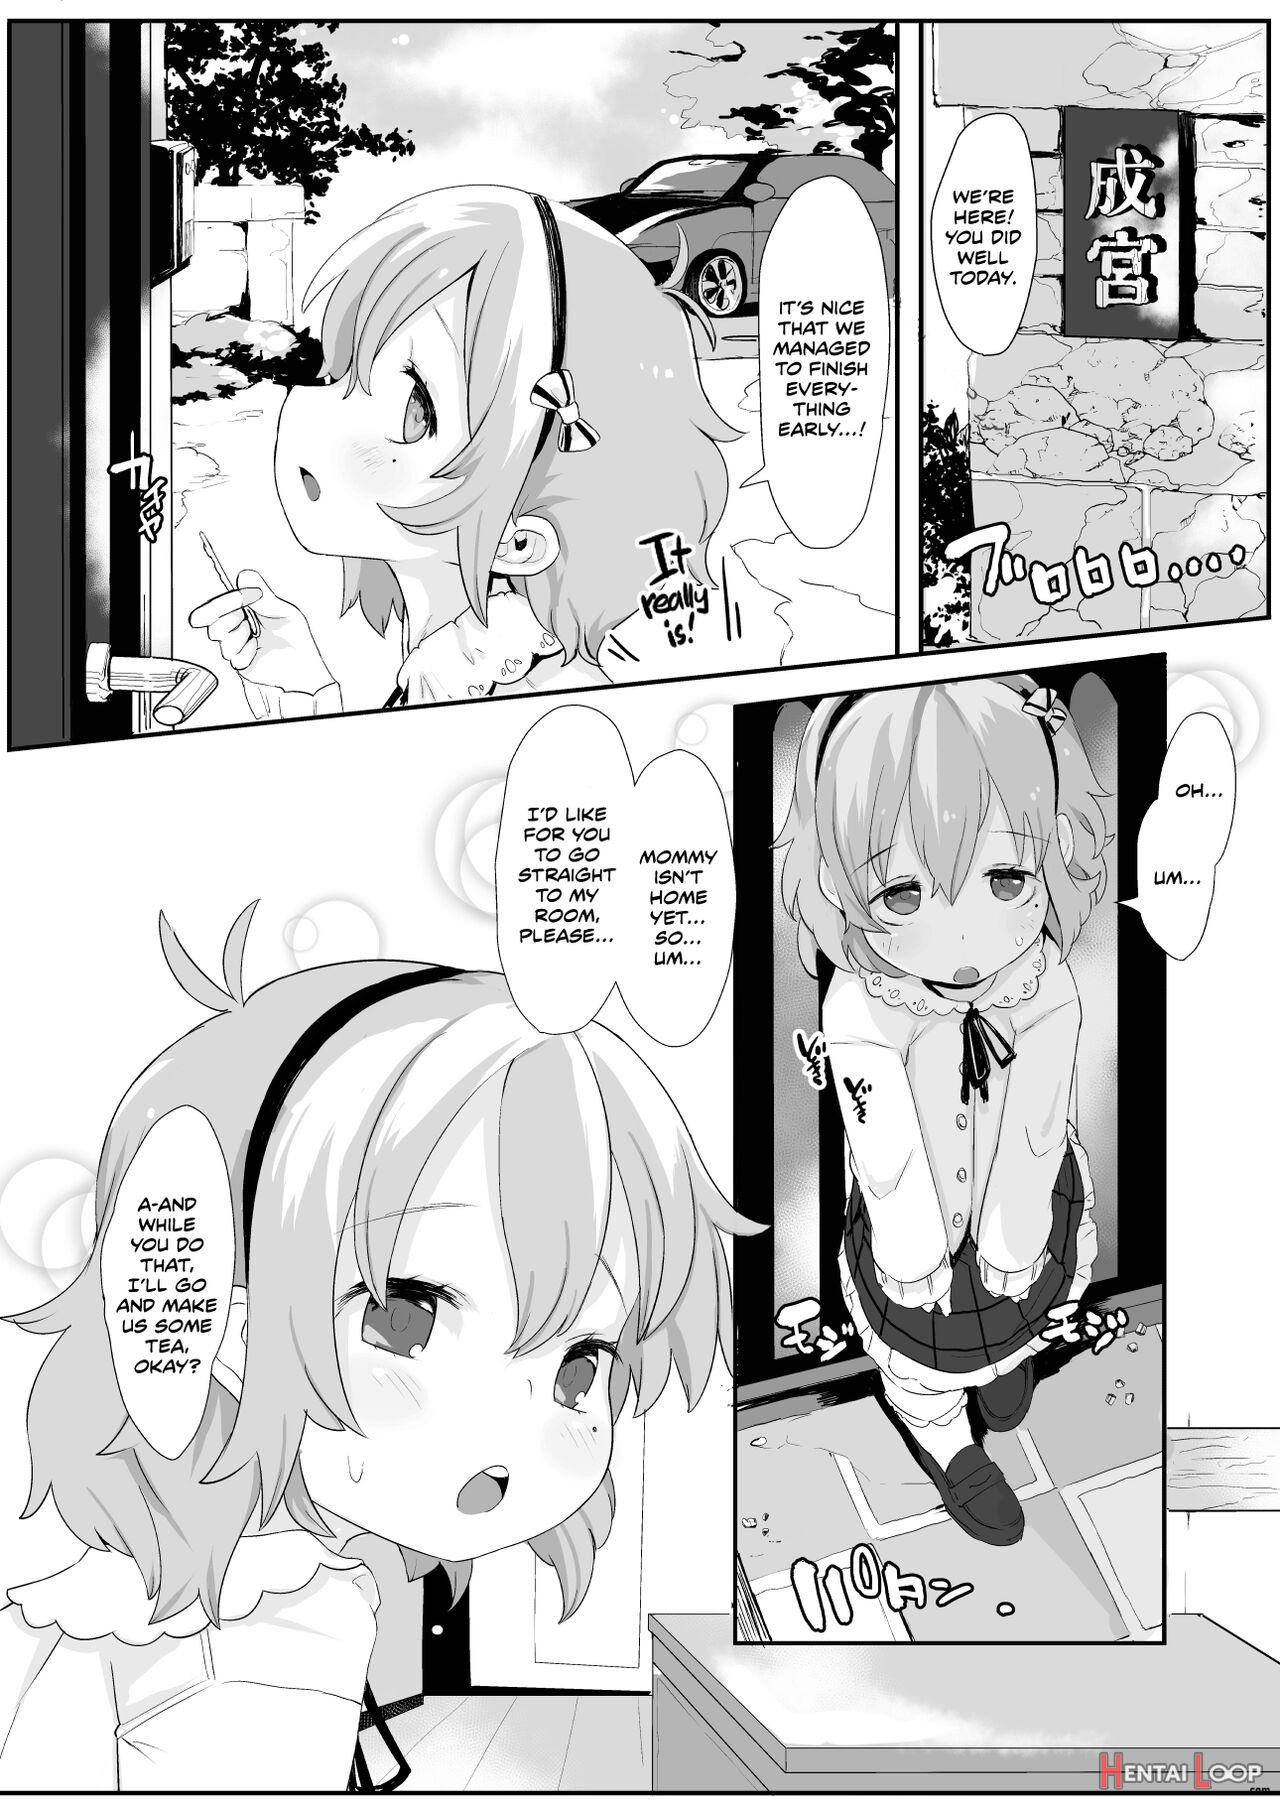 Hot 'n Steamy Babymaking Sex With Yume-chan! page 4